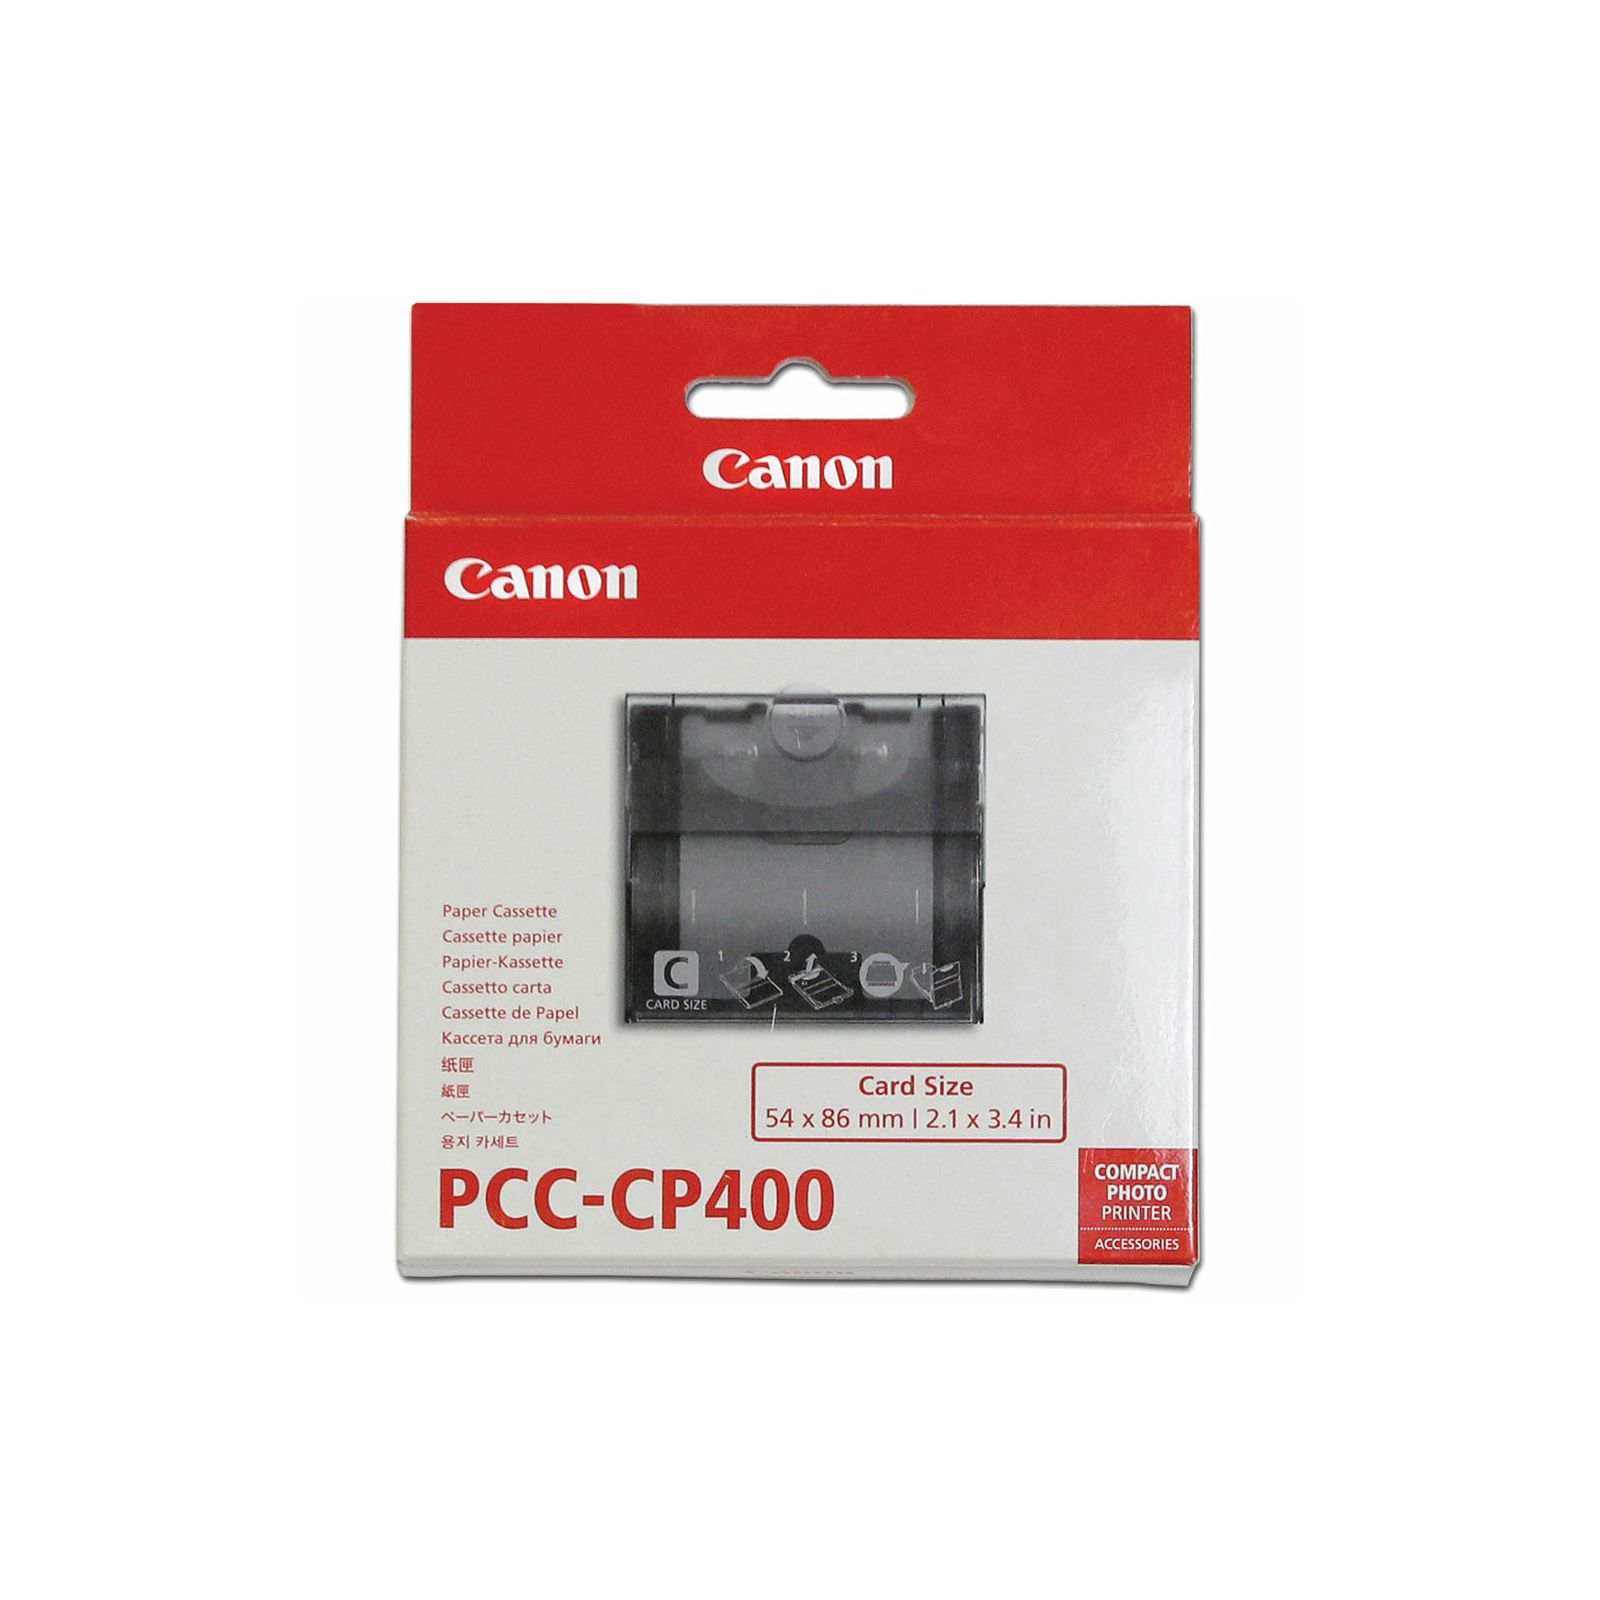 Canon PCC-CP400 Card Size Paper Cassette for Selphy CP900, CP910